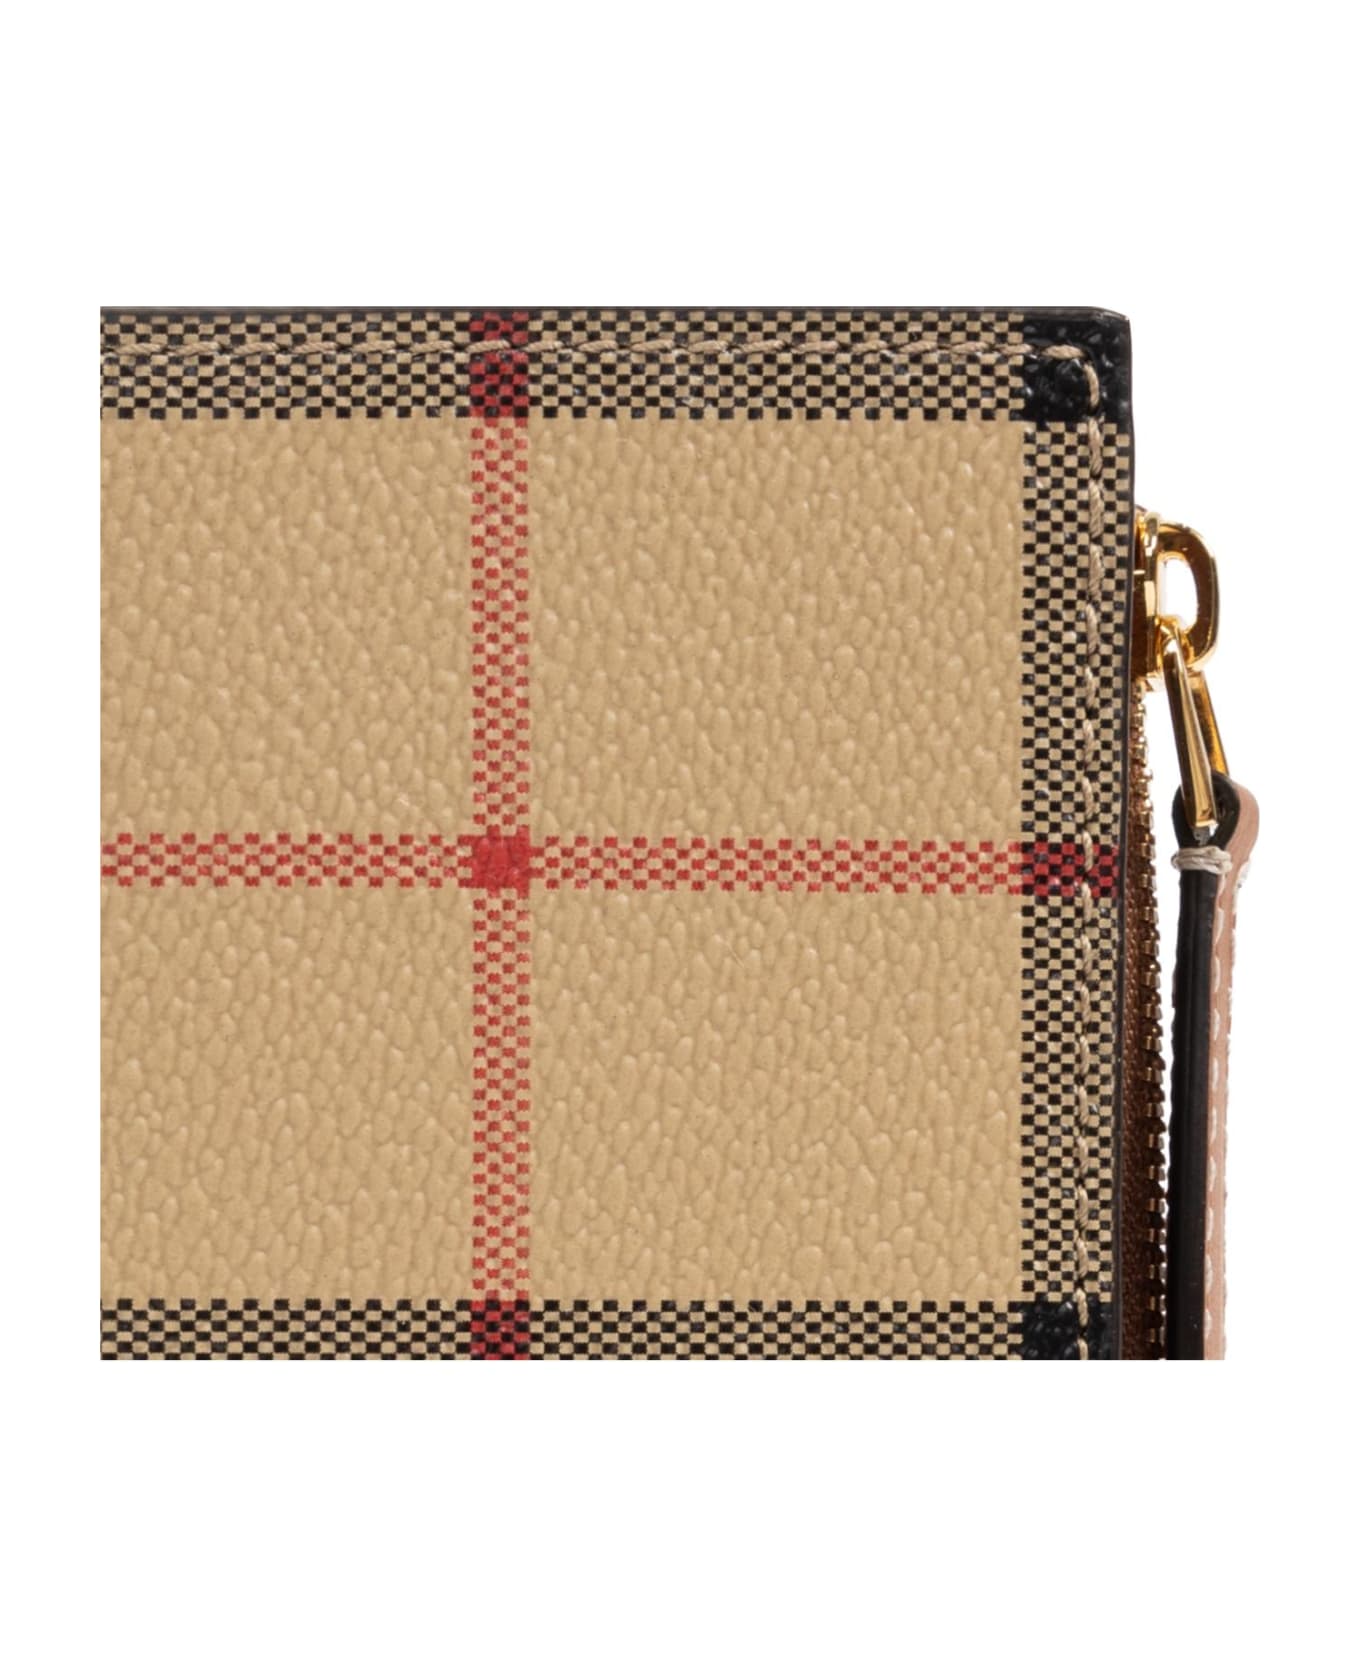 Burberry Checked Wallet - Archive Beige